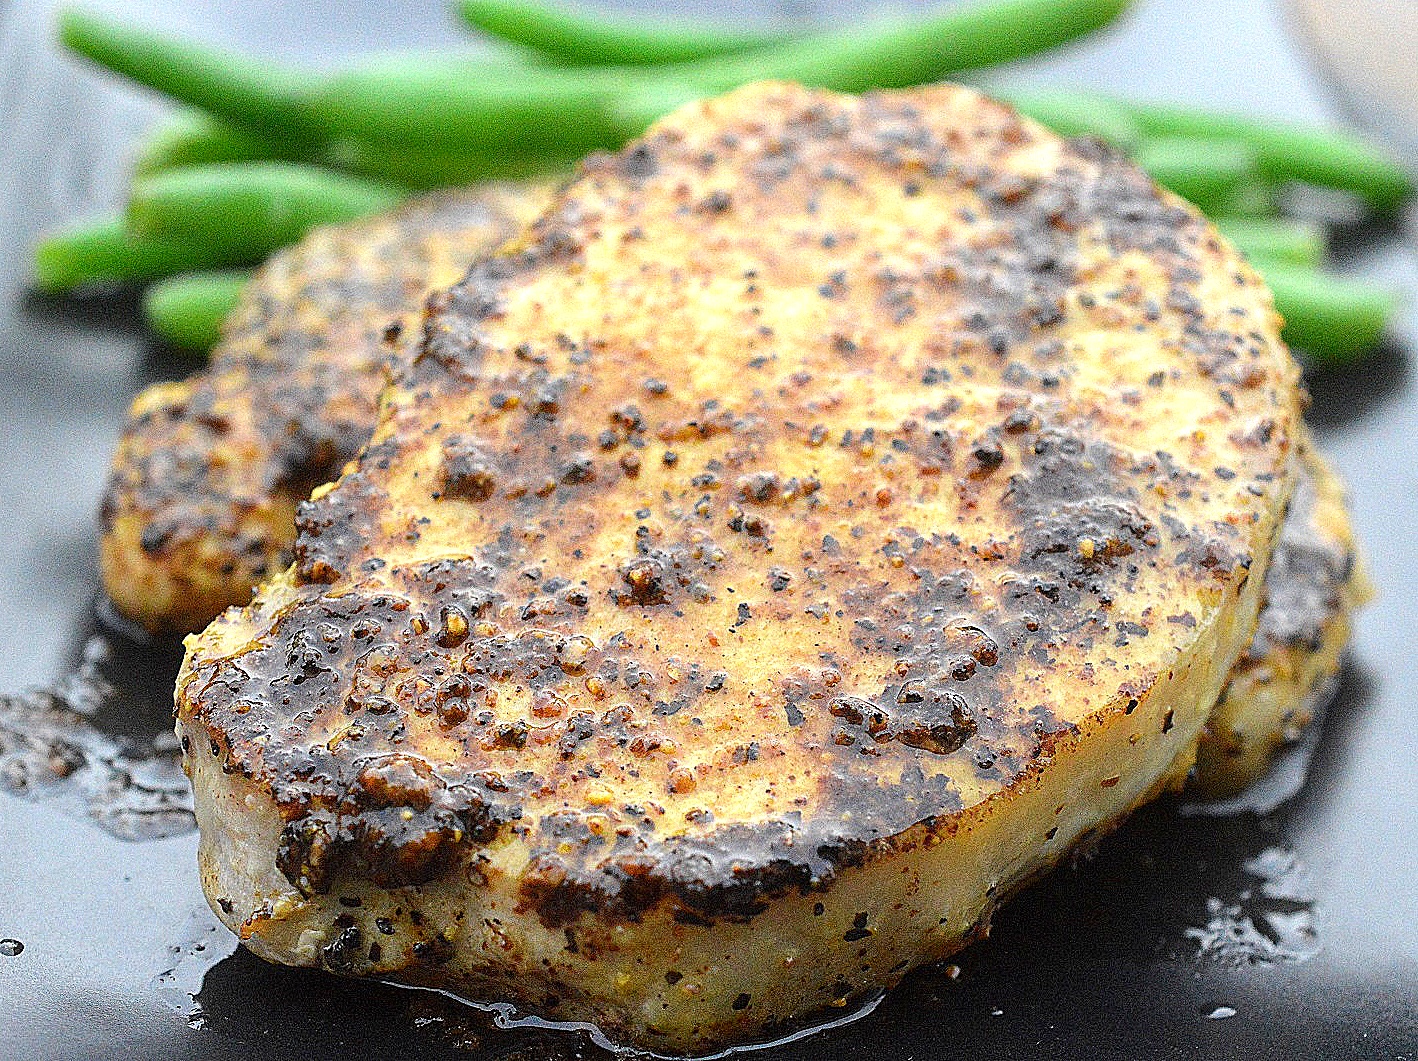 Pan Fried Pork Chops recipe is fast and flavorful